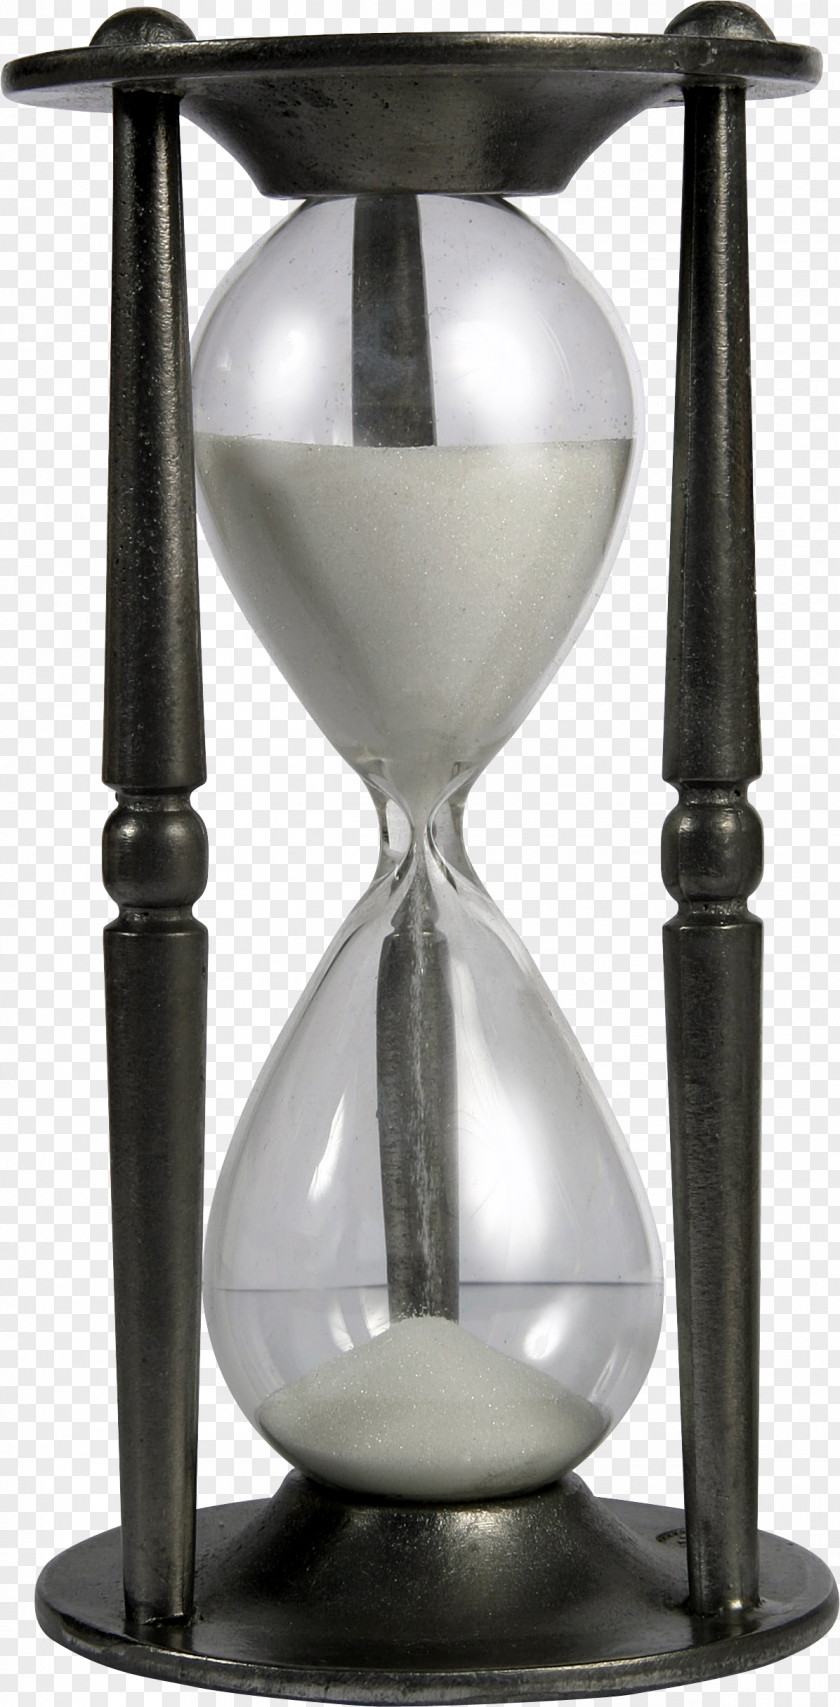 White Hourglass Clock Transparency And Translucency Clip Art PNG